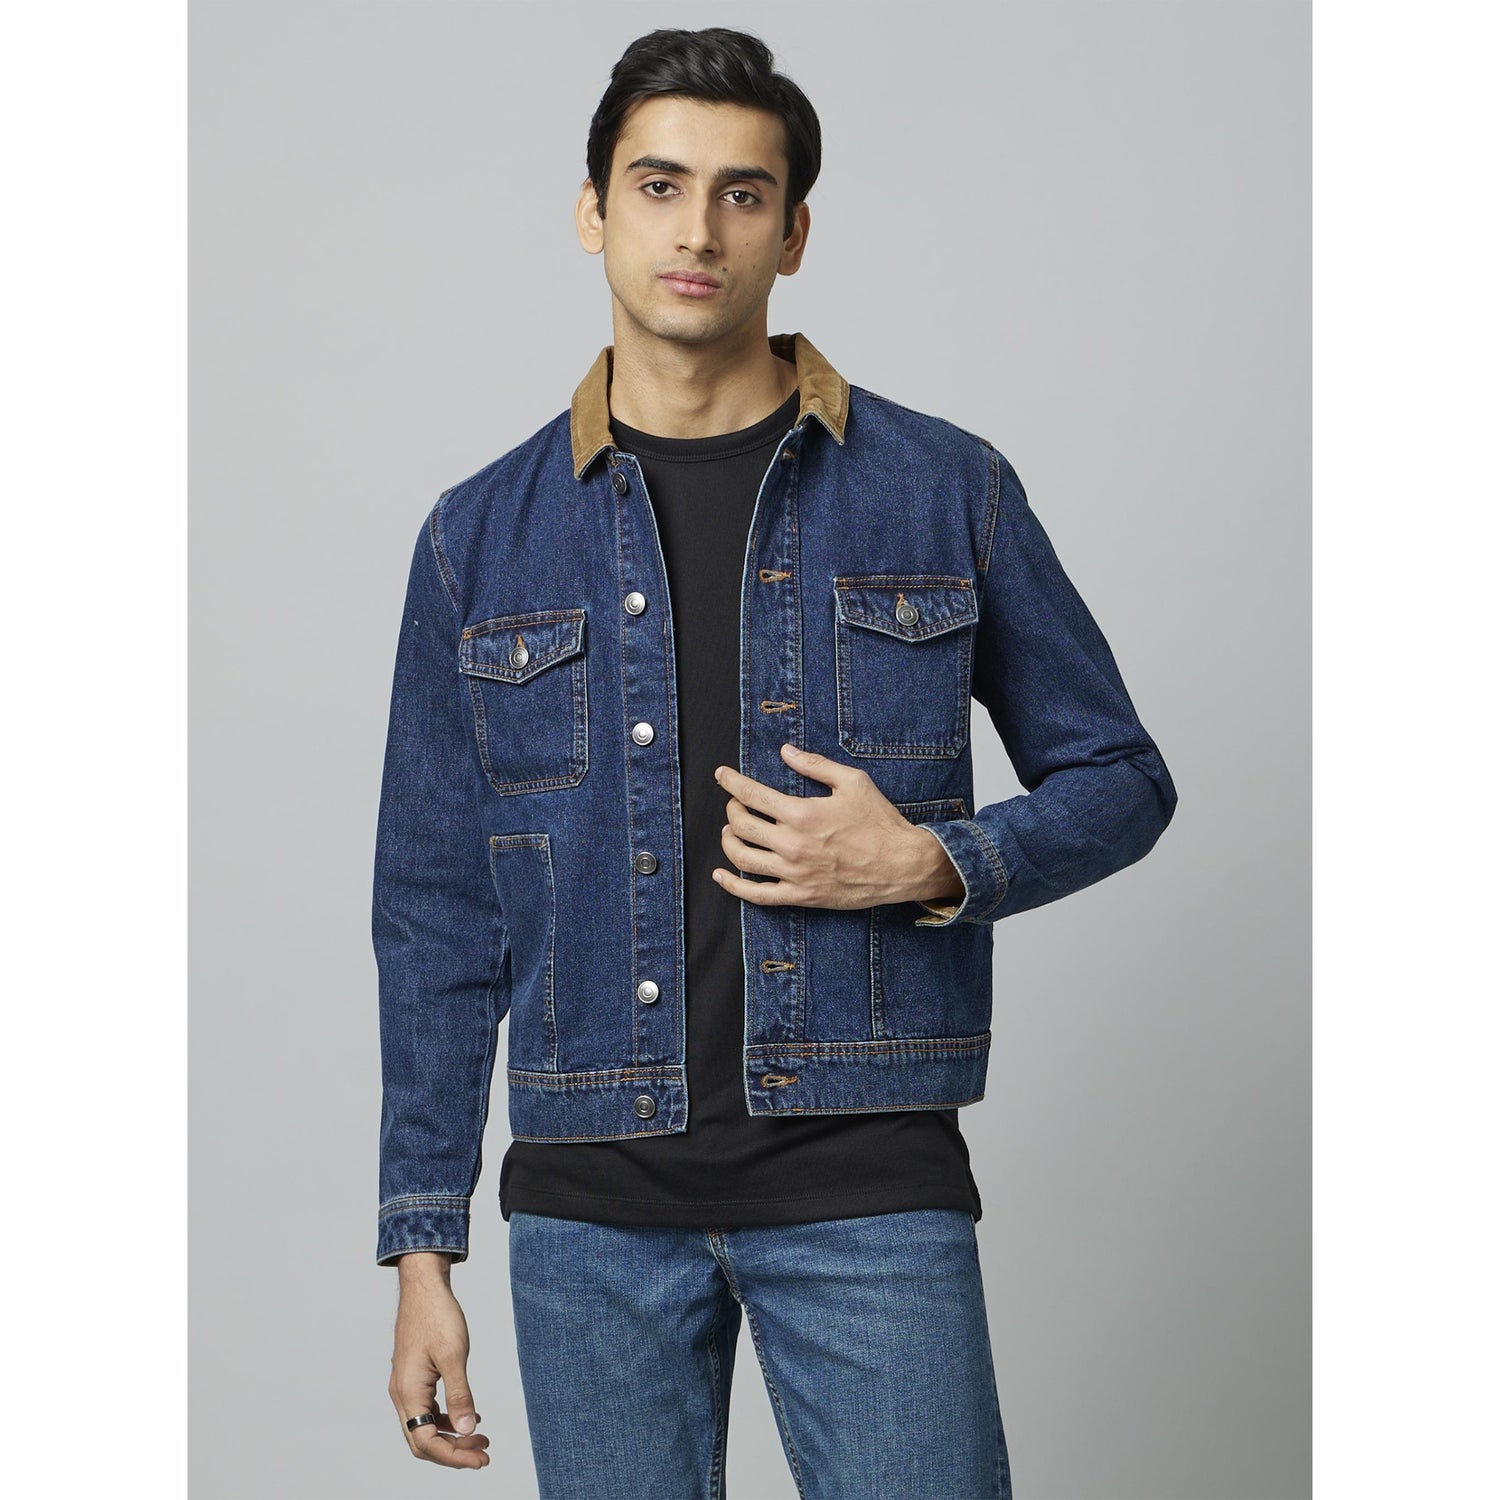 Blue Solid Long Sleeves Fashion Jackets (DUWORKER)